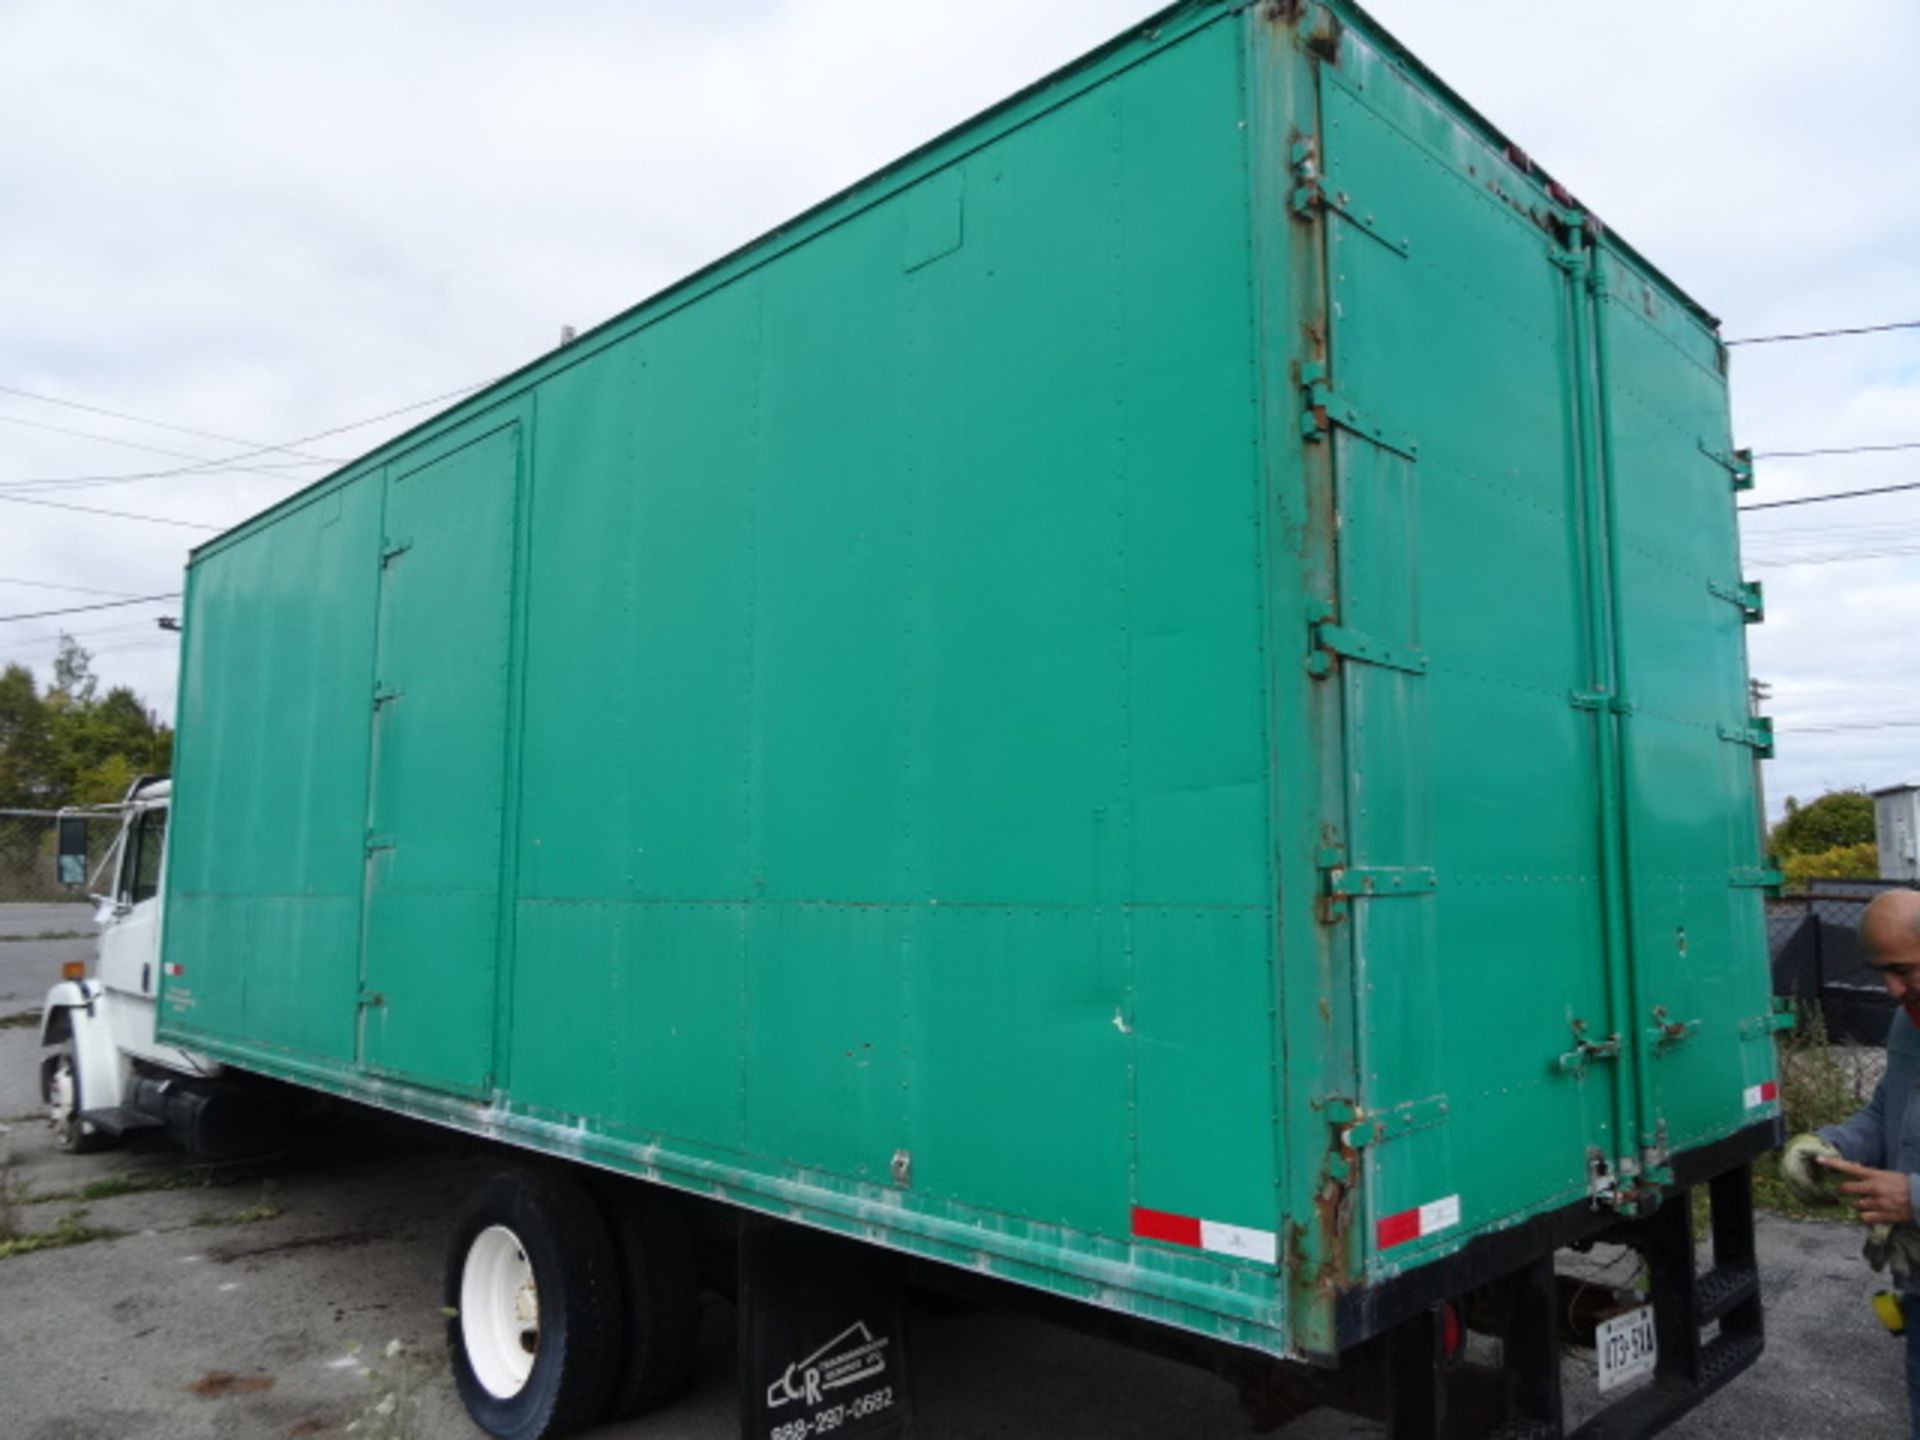 1x, 1995 Freightliner FL60 Straight Truck w/ 22' Reefer Box - Thermoking KD II SR - Image 3 of 15